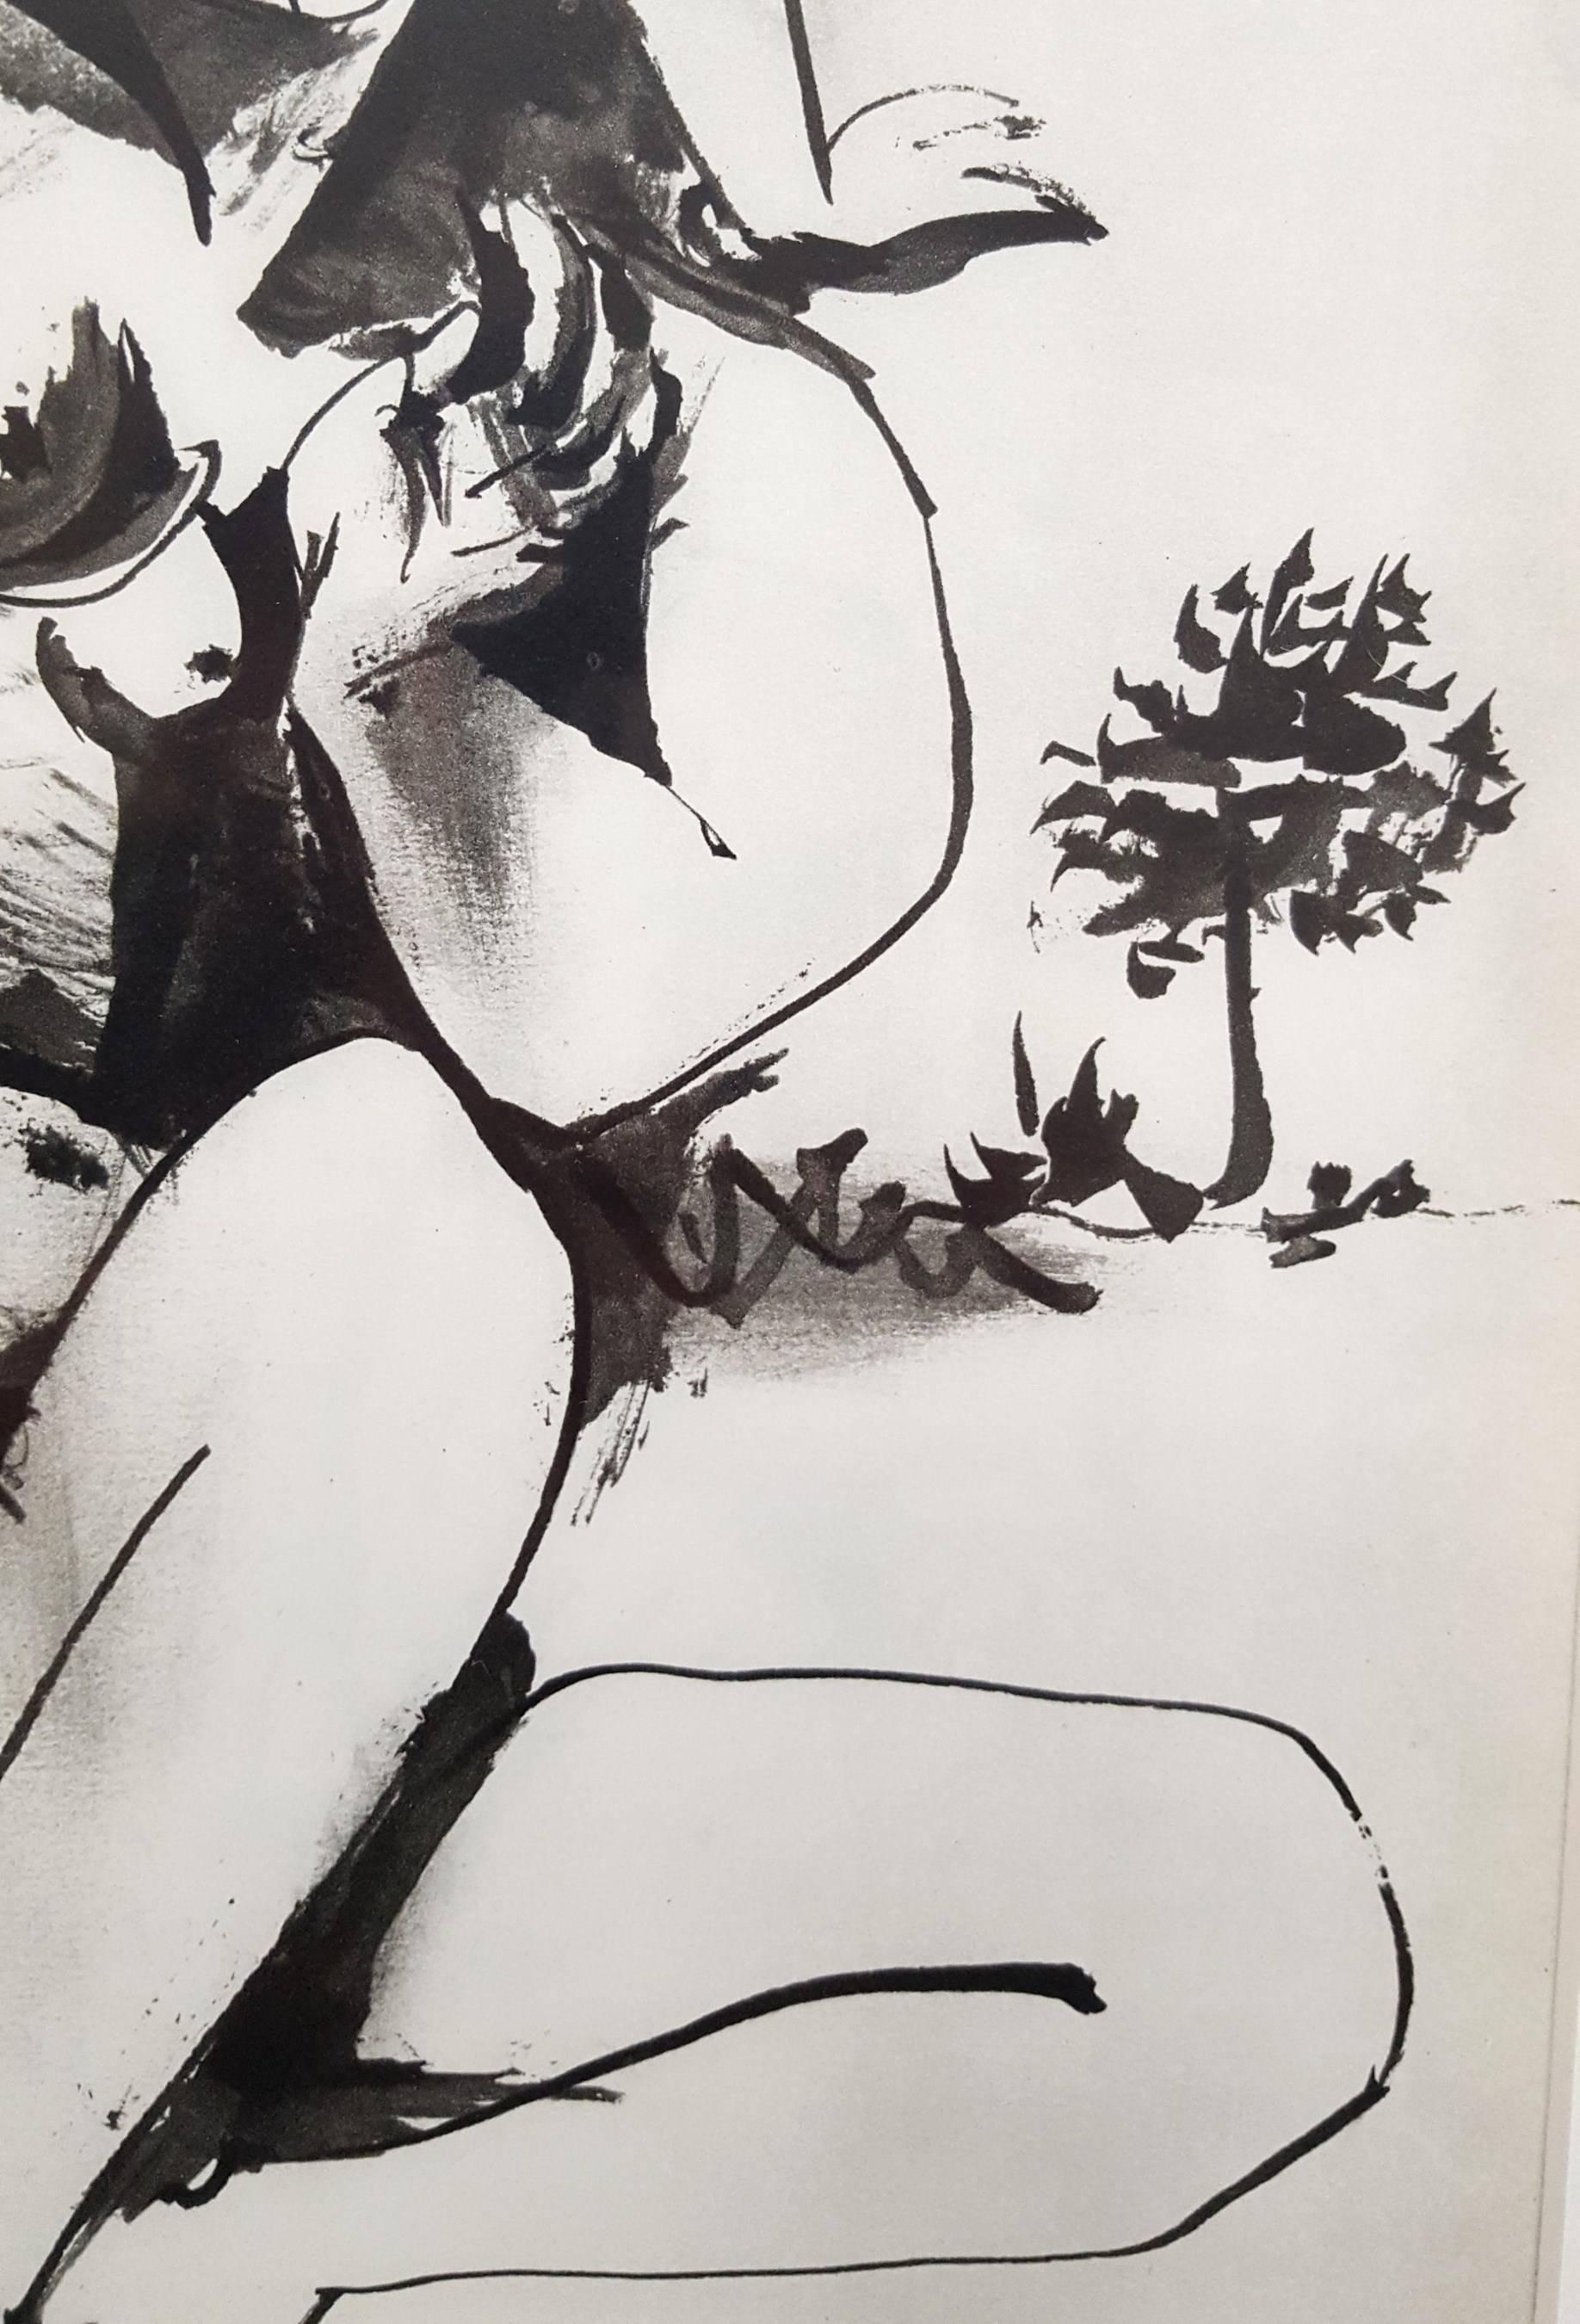 A vintage heliogravure after Spanish artist Pablo Picasso (1881-1973) titled "La Comedie Humaine", 1954. Published by Verve, Paris France 1954. Produced from Picasso's sketches from the series entitled "La Comedie Humaine".